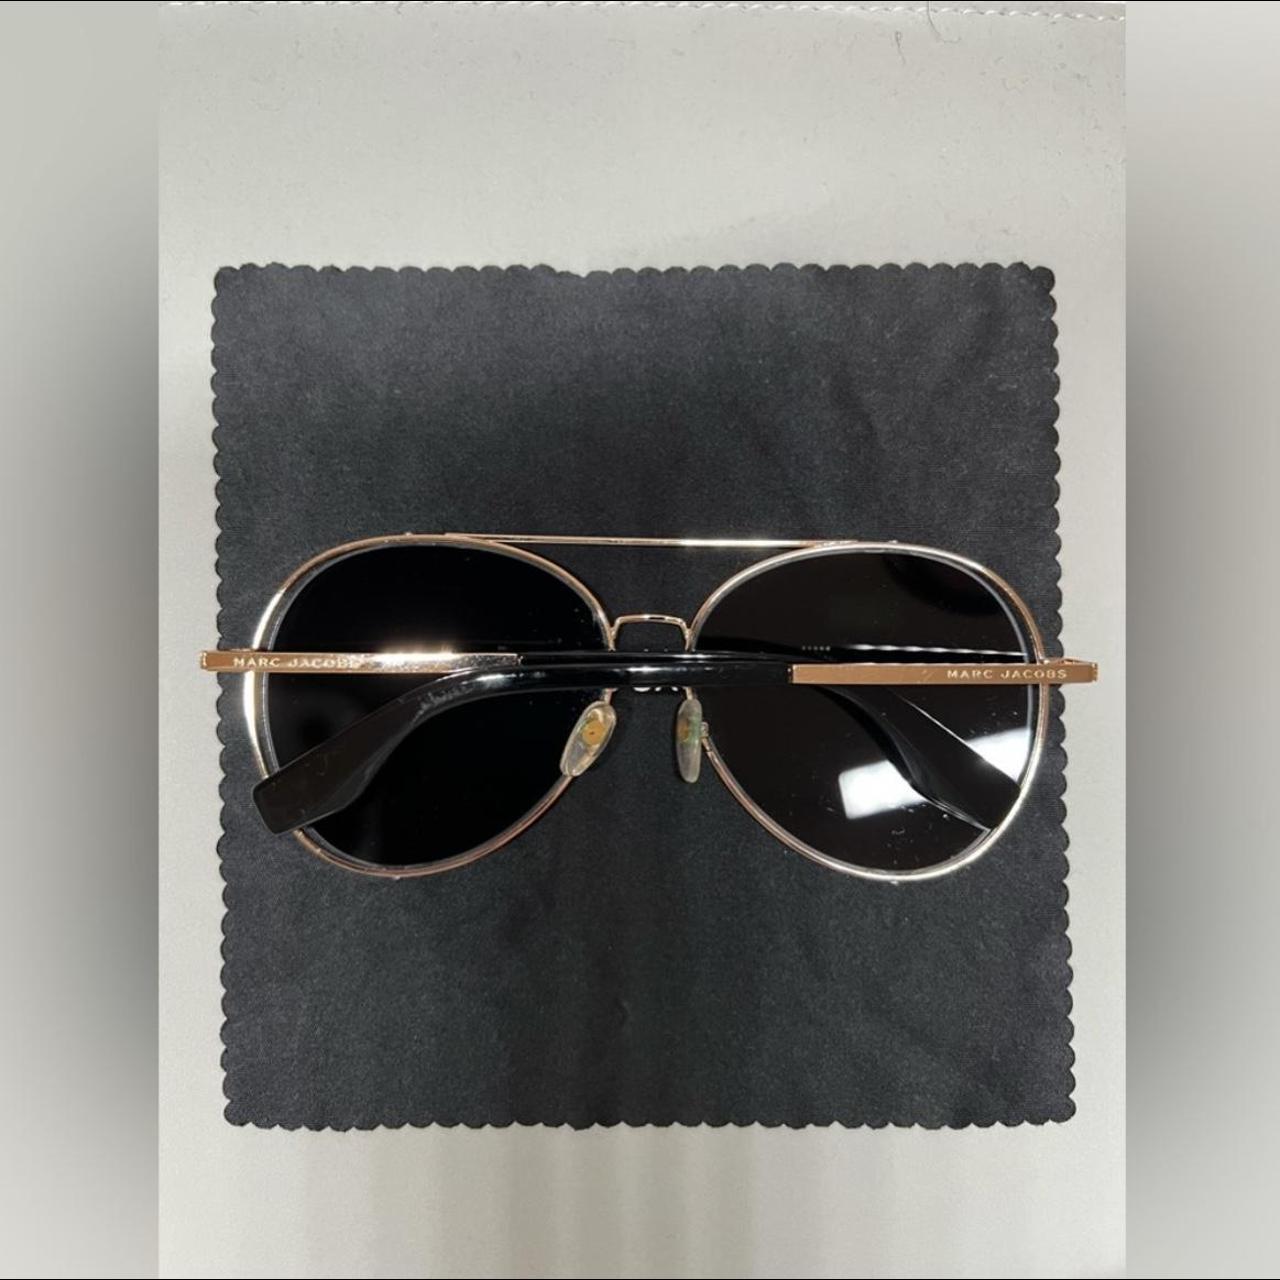 Marc Jacobs Women's Black and Gold Sunglasses (2)